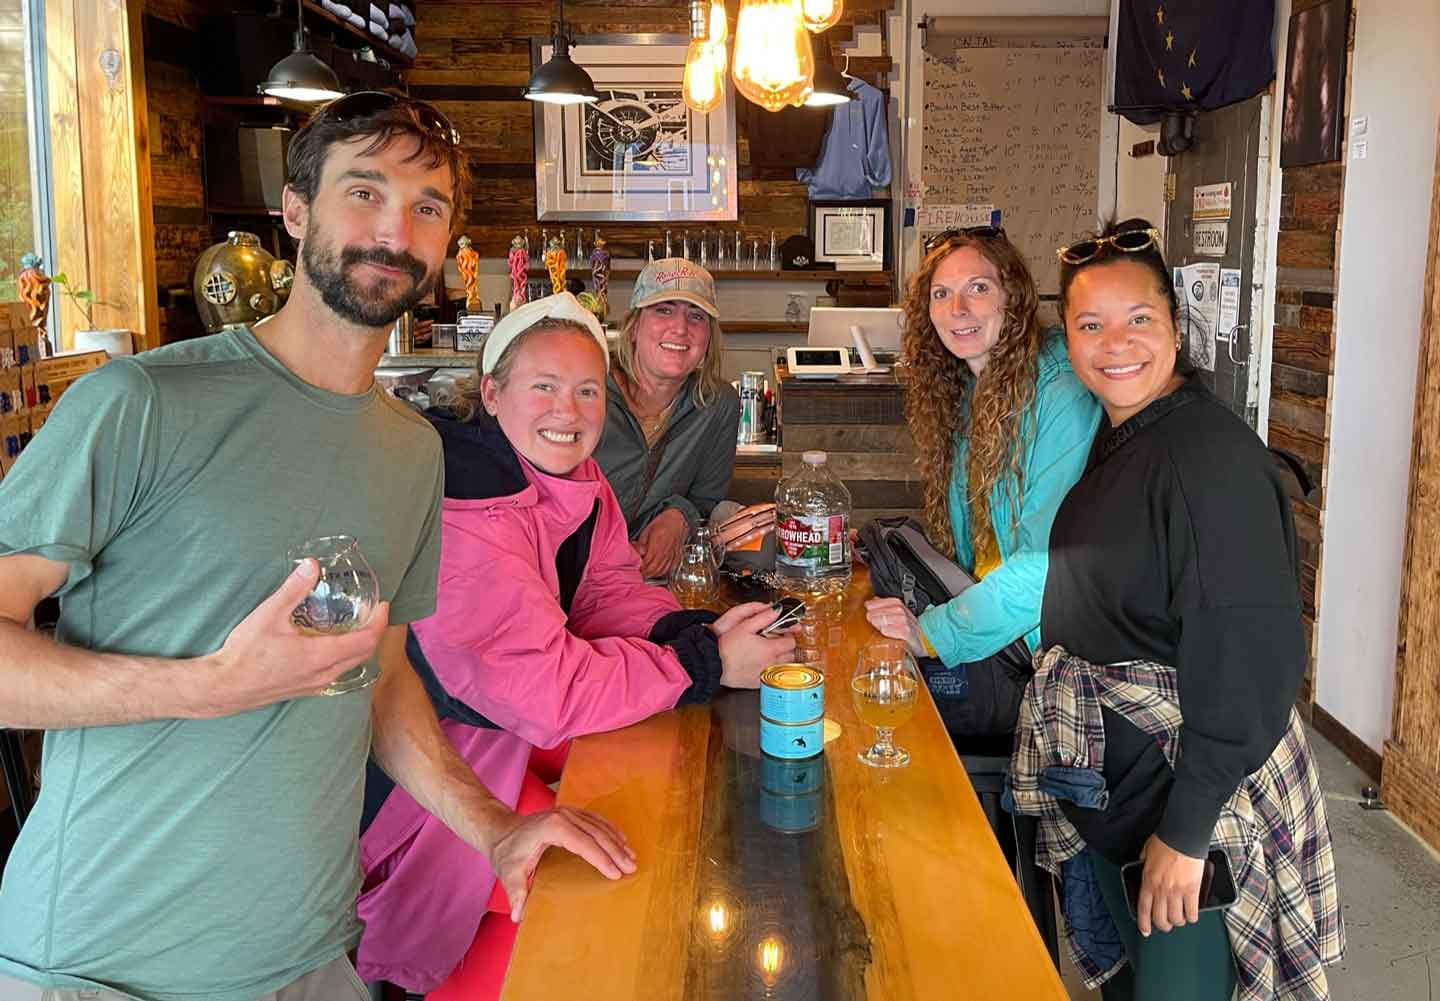 If you've got time, grab a quick brew. Here's a pick of our team on our most recent brewery outing!